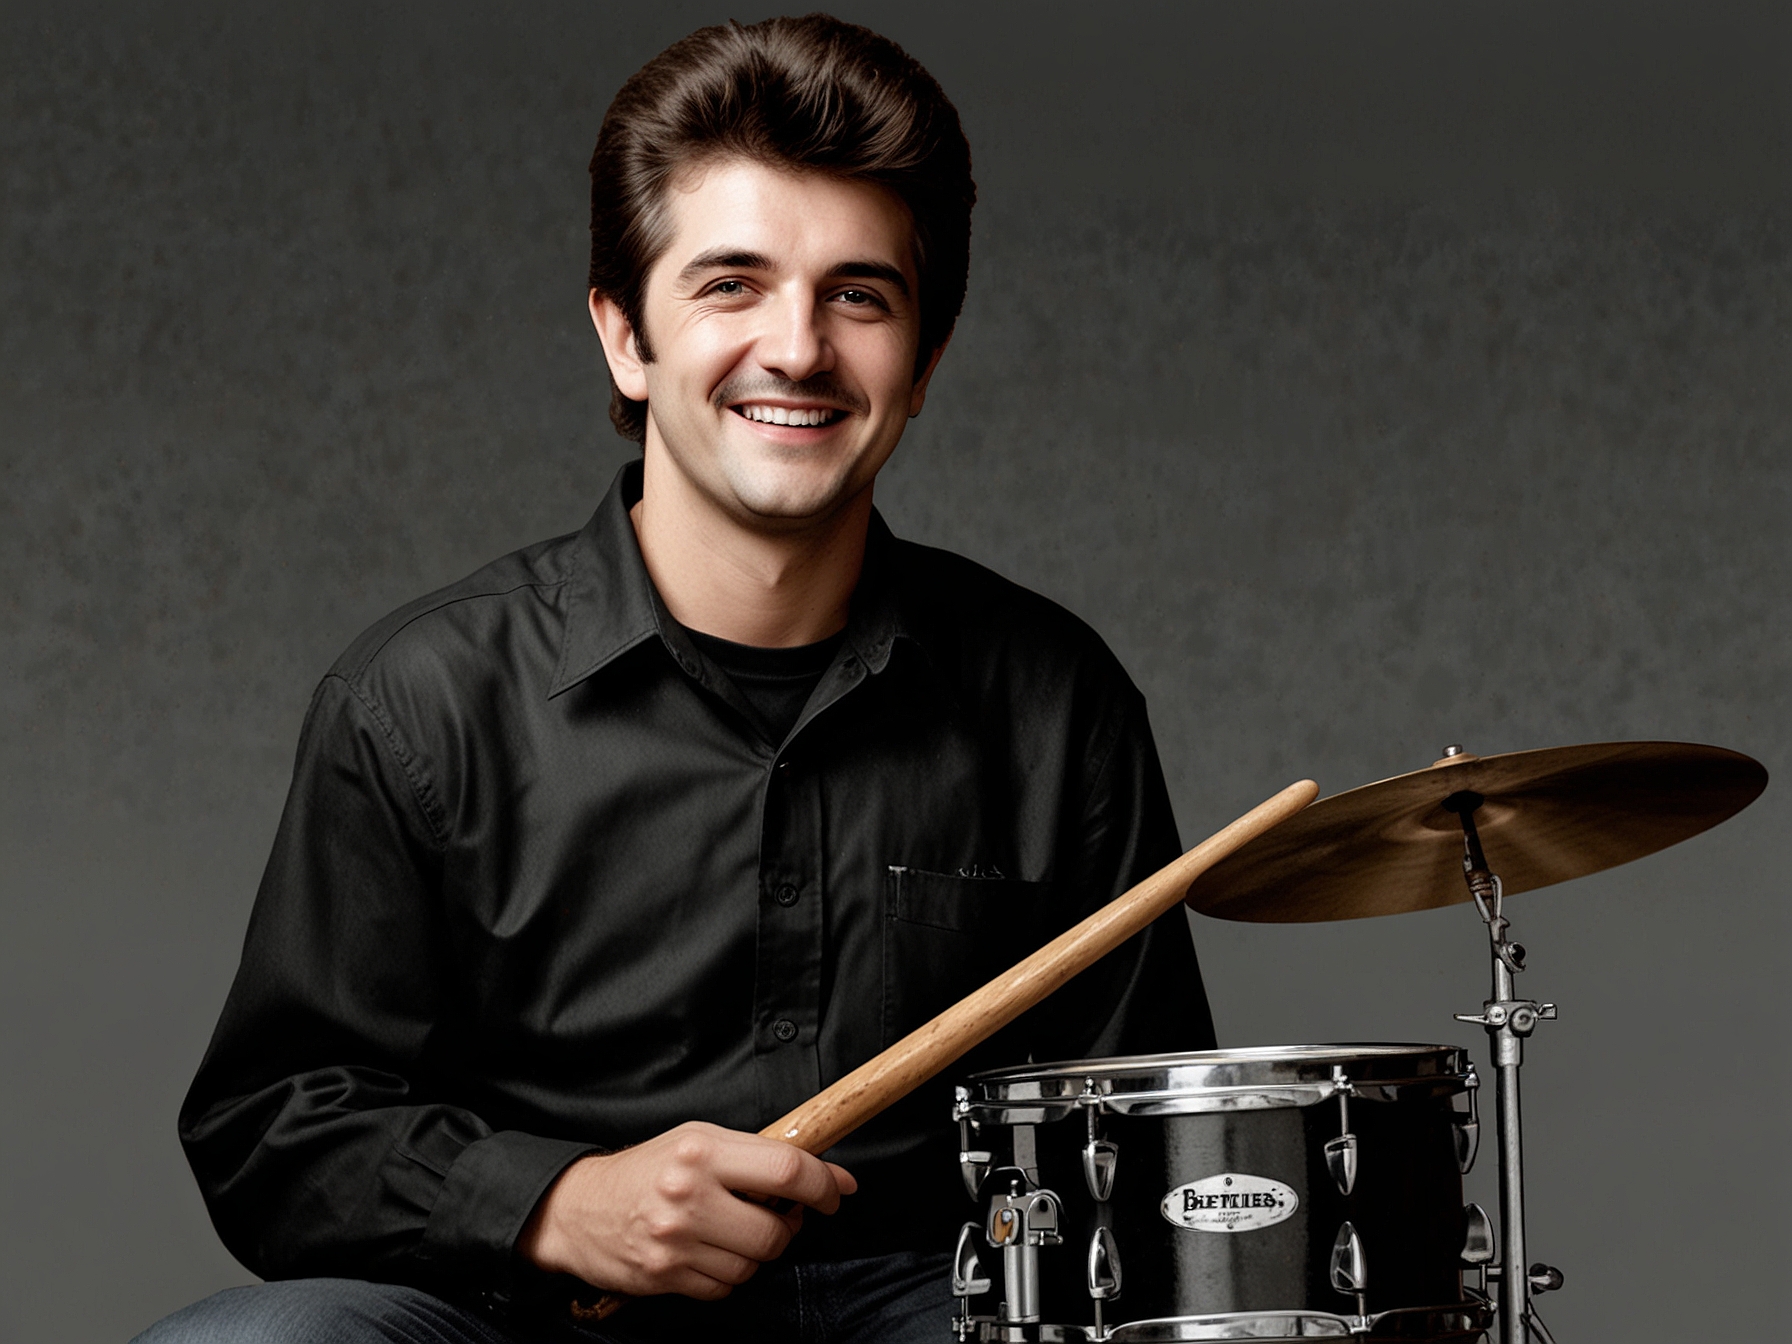 A current-day image of Pete Best, smiling warmly as he holds a vintage Beatles drumstick, juxtaposed against a backdrop featuring an iconic Beatles album cover.